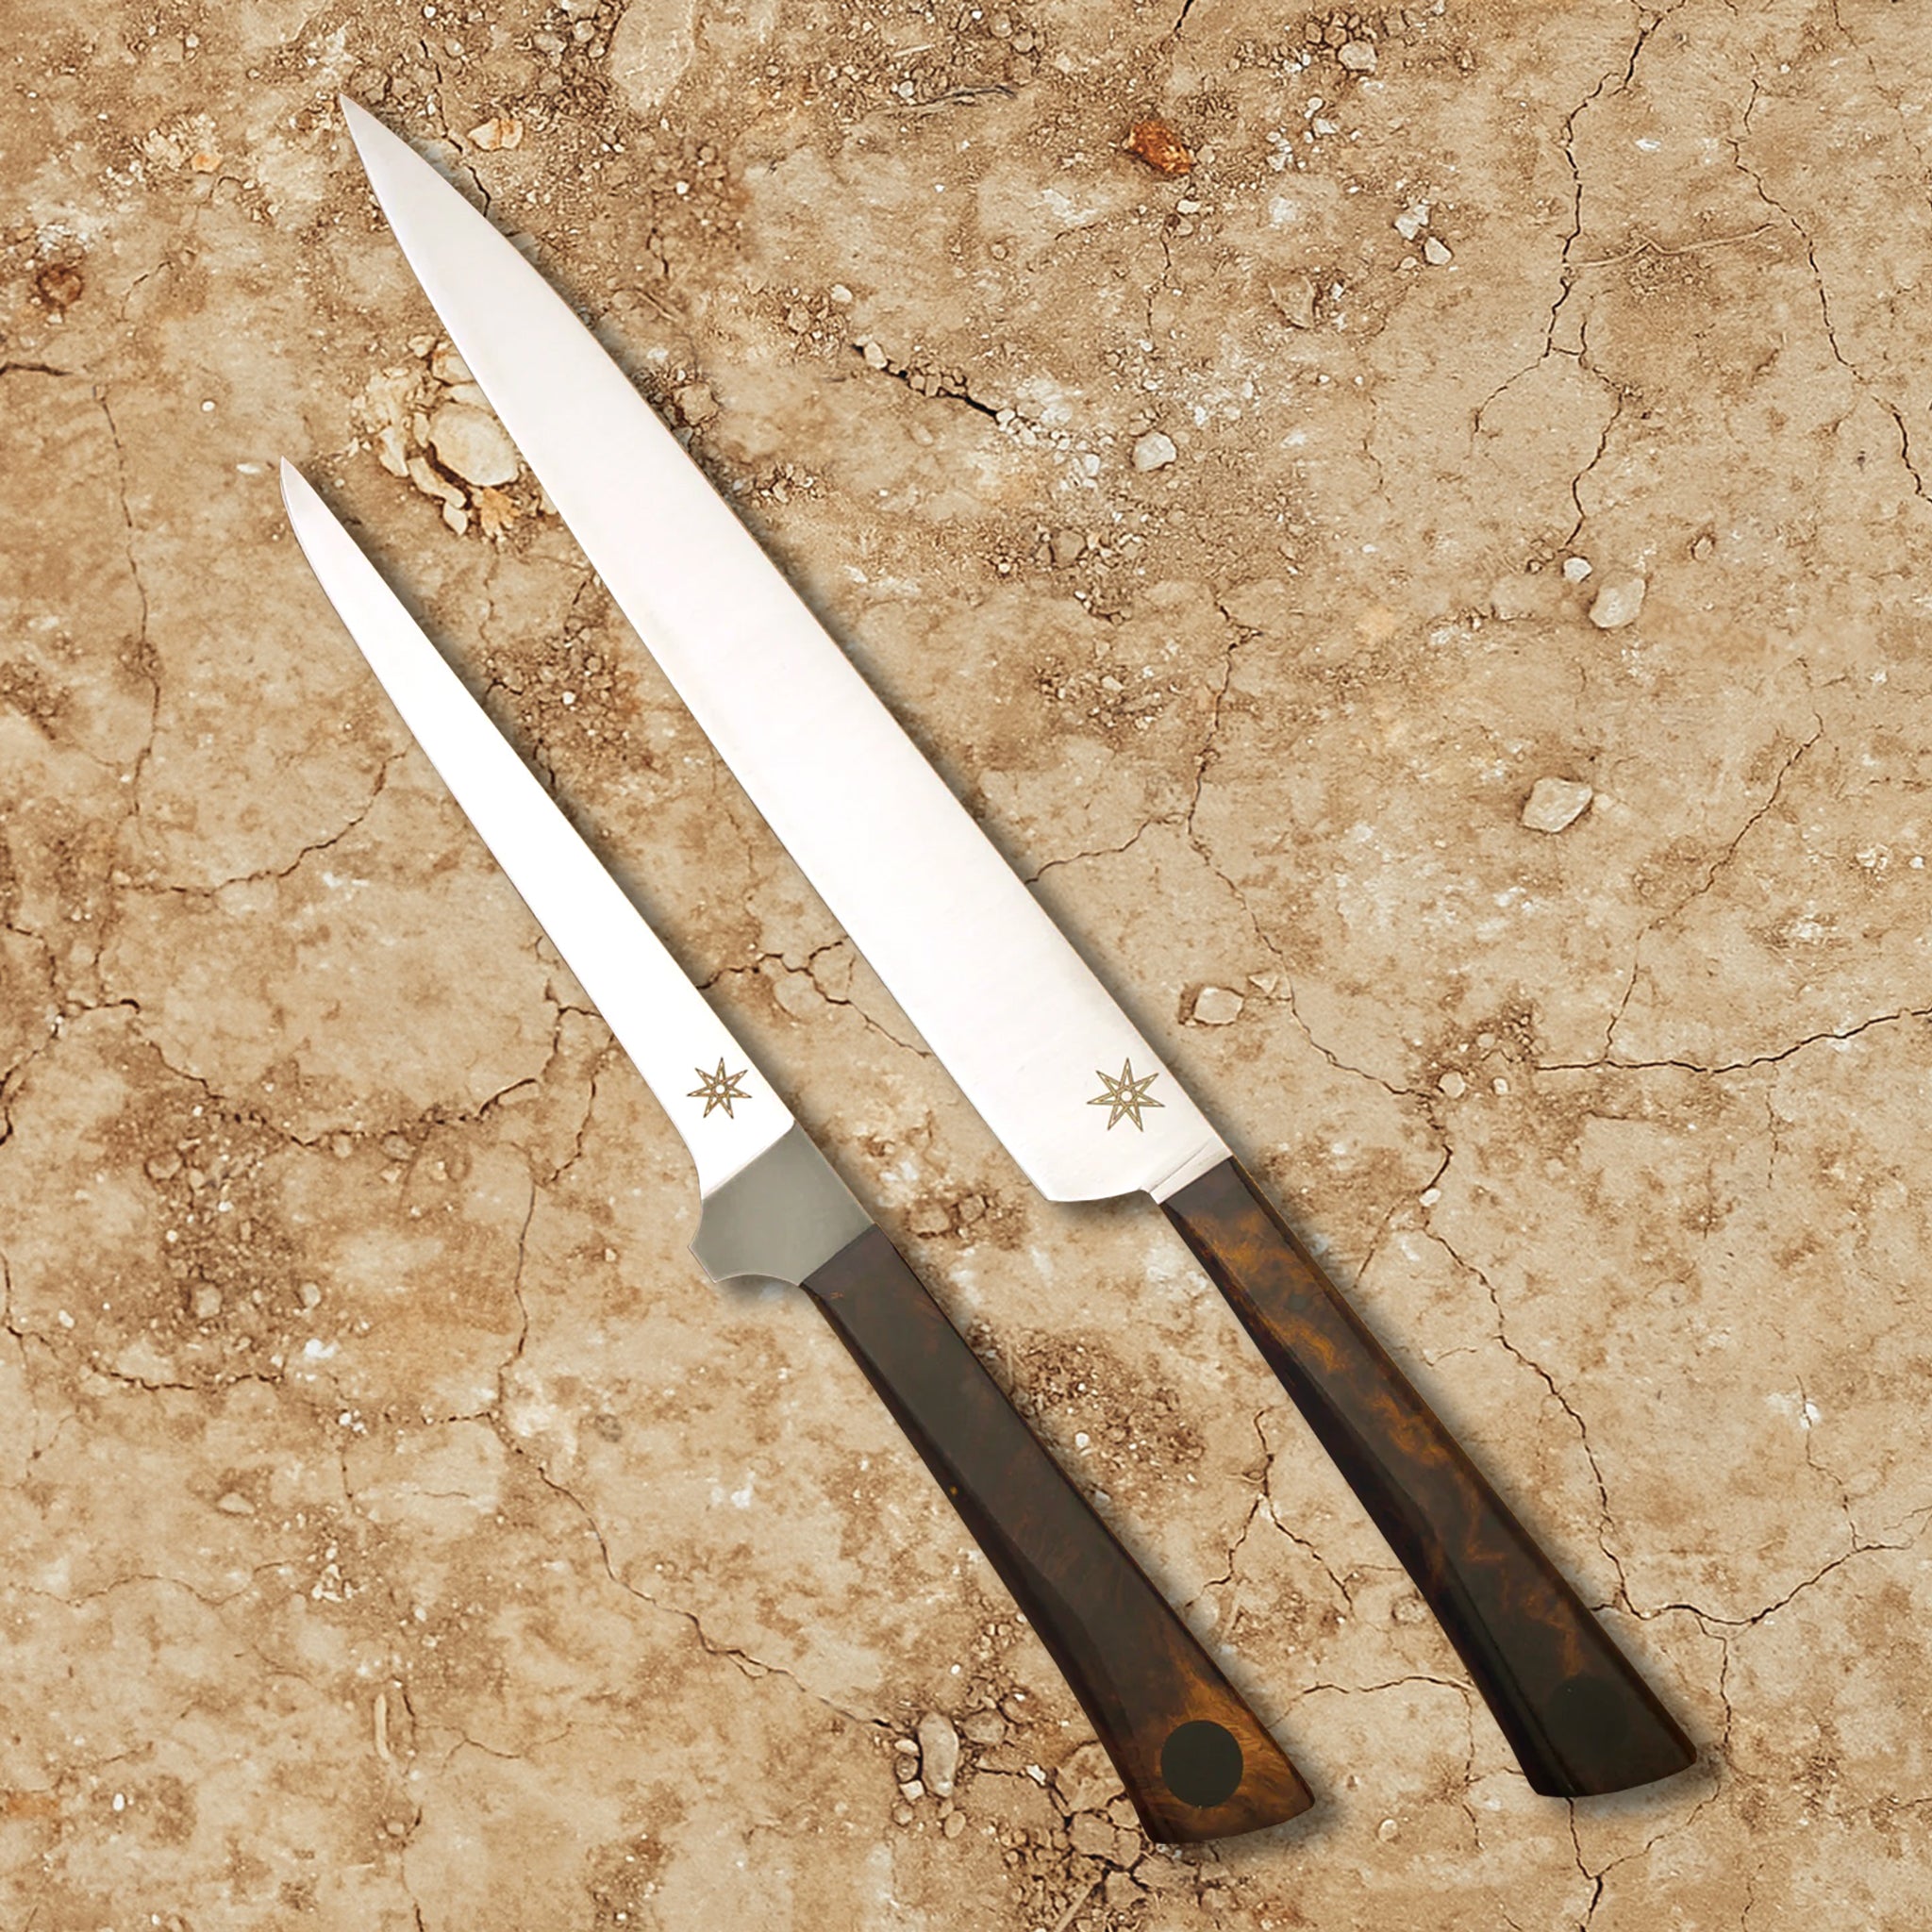 10" stainless steel Slicer and 6" straight boning knives by Town Cutler featuring Olneya Desert Ironwood handle. Sold as set.